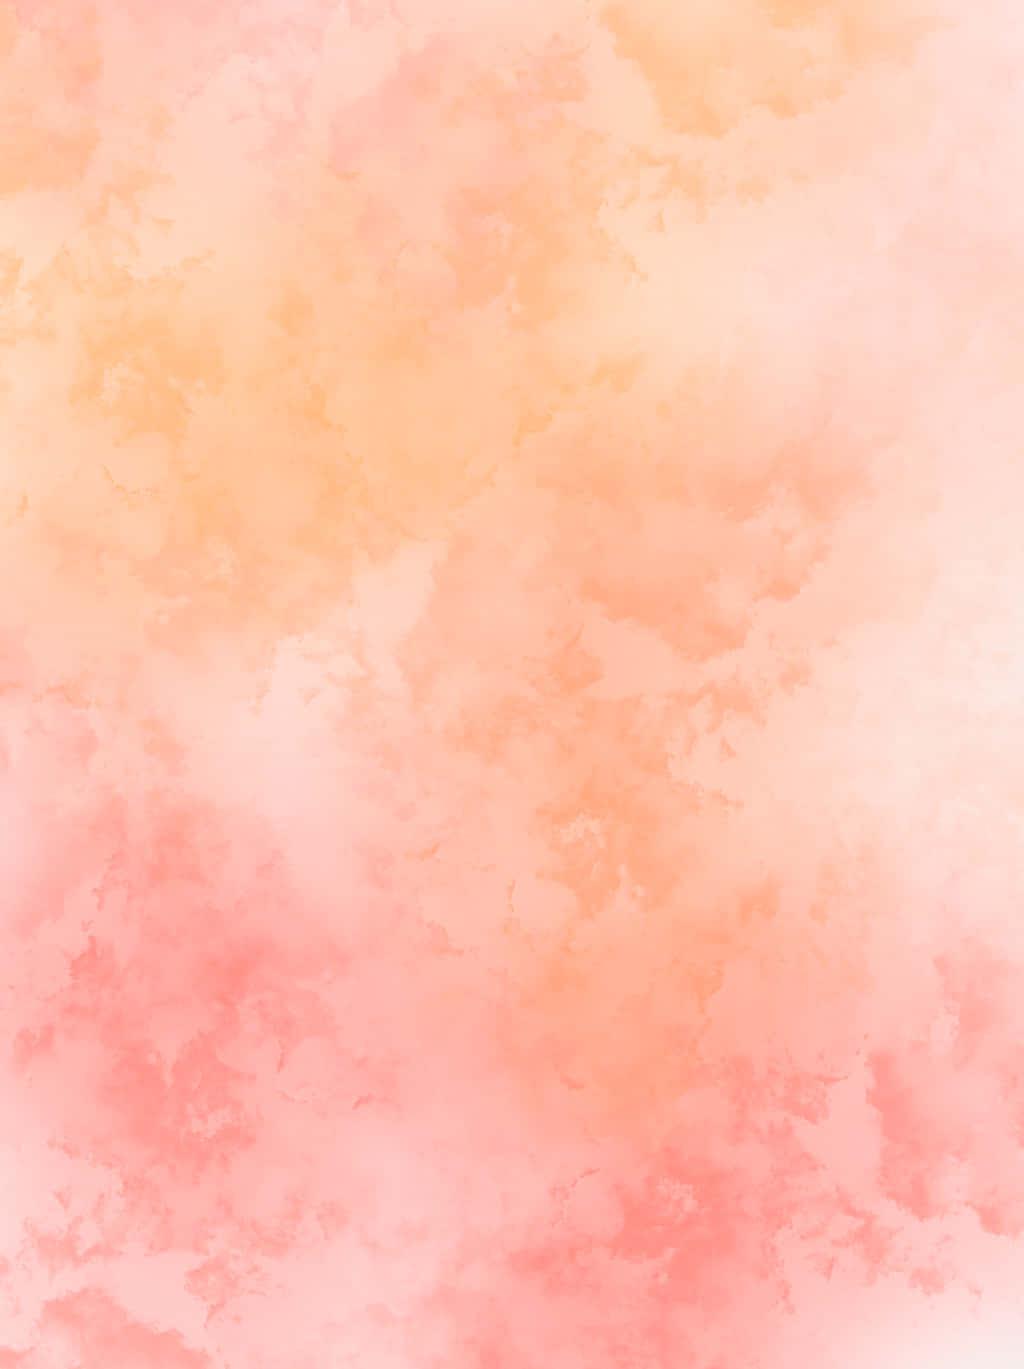 Watercolor Background With Pink And Orange Colors